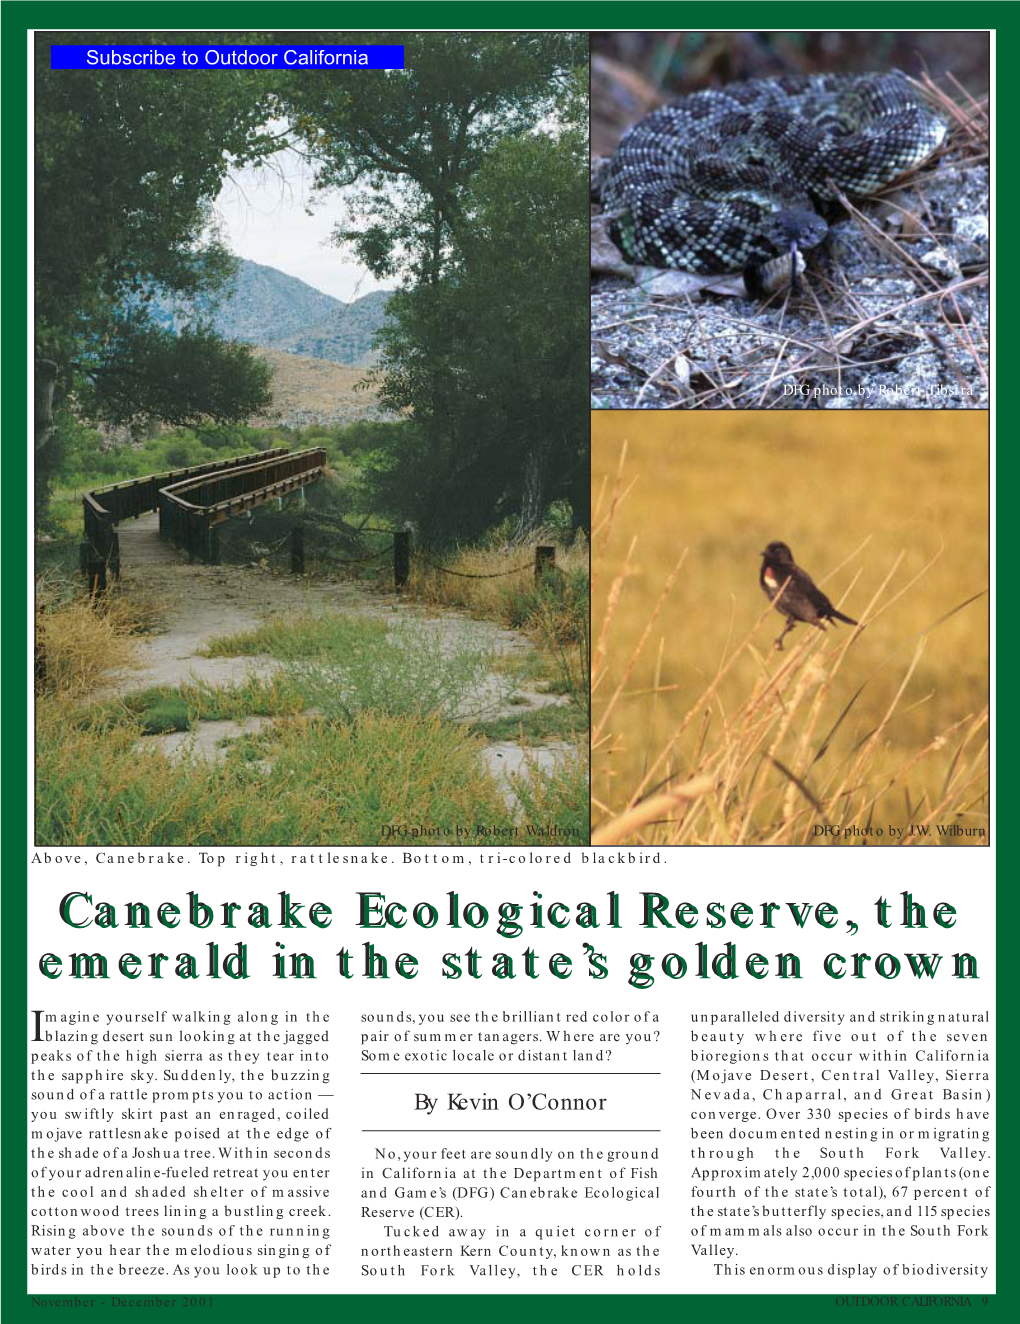 Canebrake Ecological Reserve, the Emerald in the State's Golden Crown